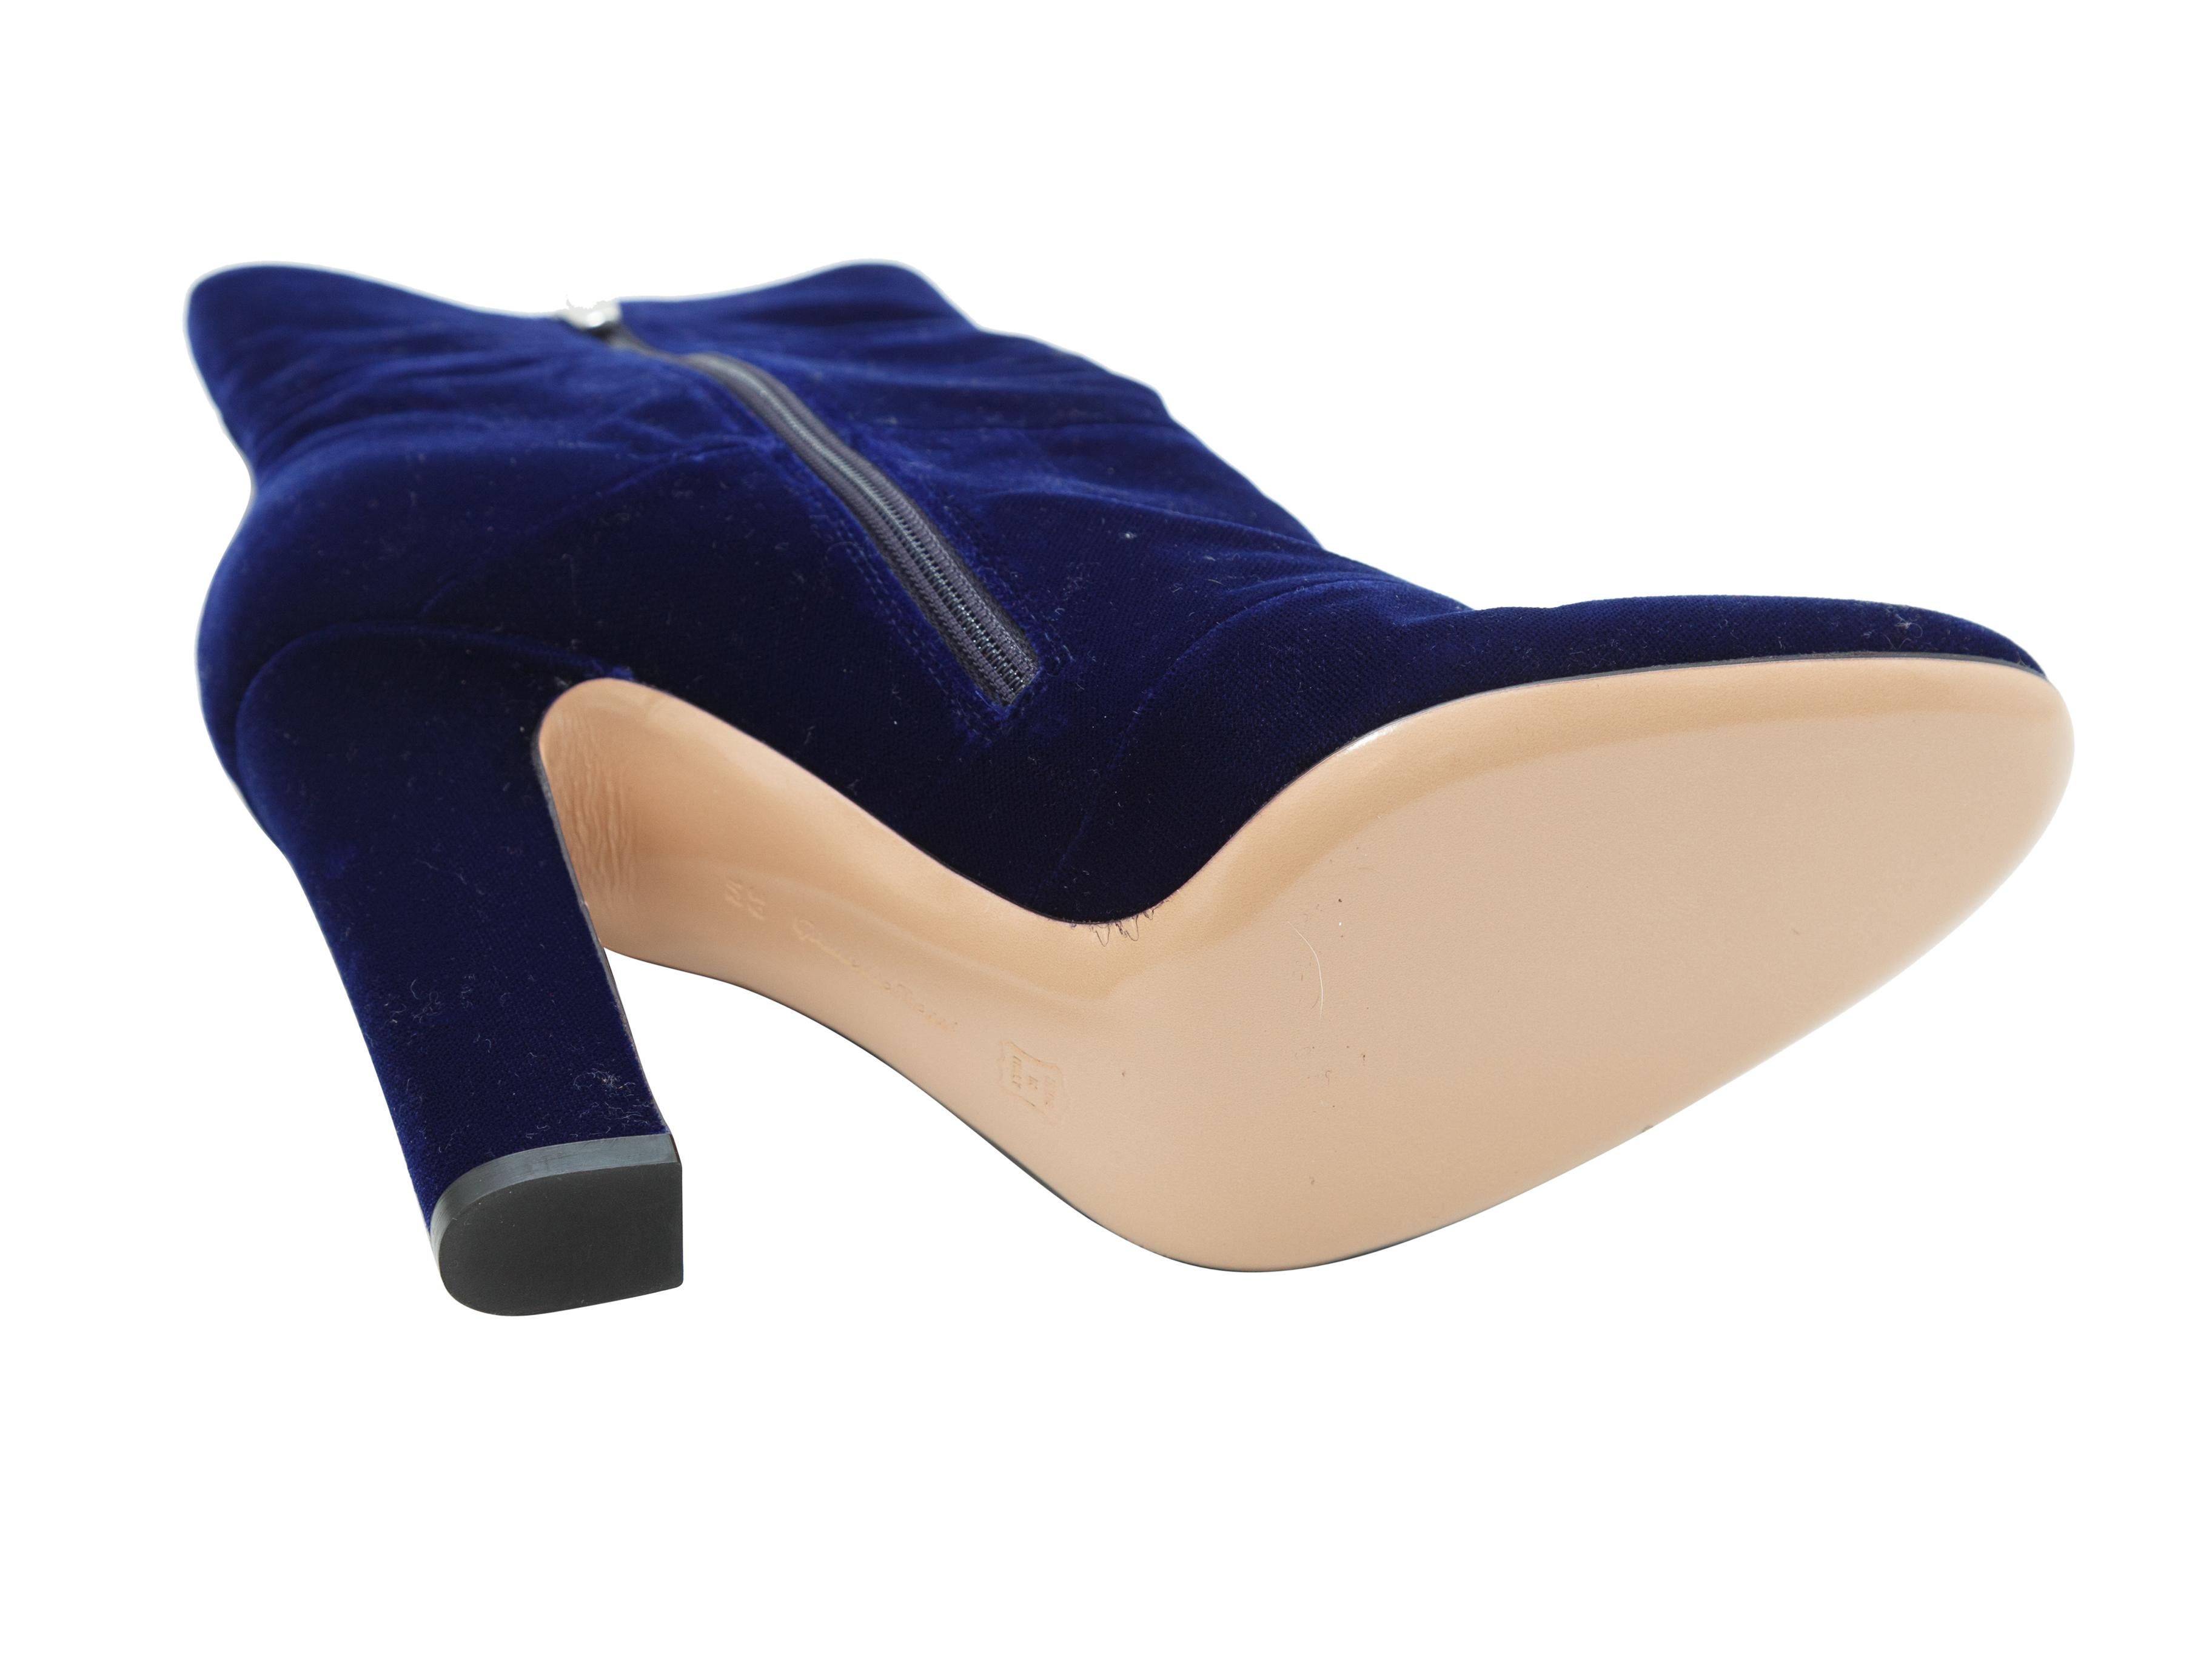 Product details:  Blue velvet ankle boots by Gianvito Rossi.  Inner zip closure.  Round toe.  Silvertone hardware.  4.25